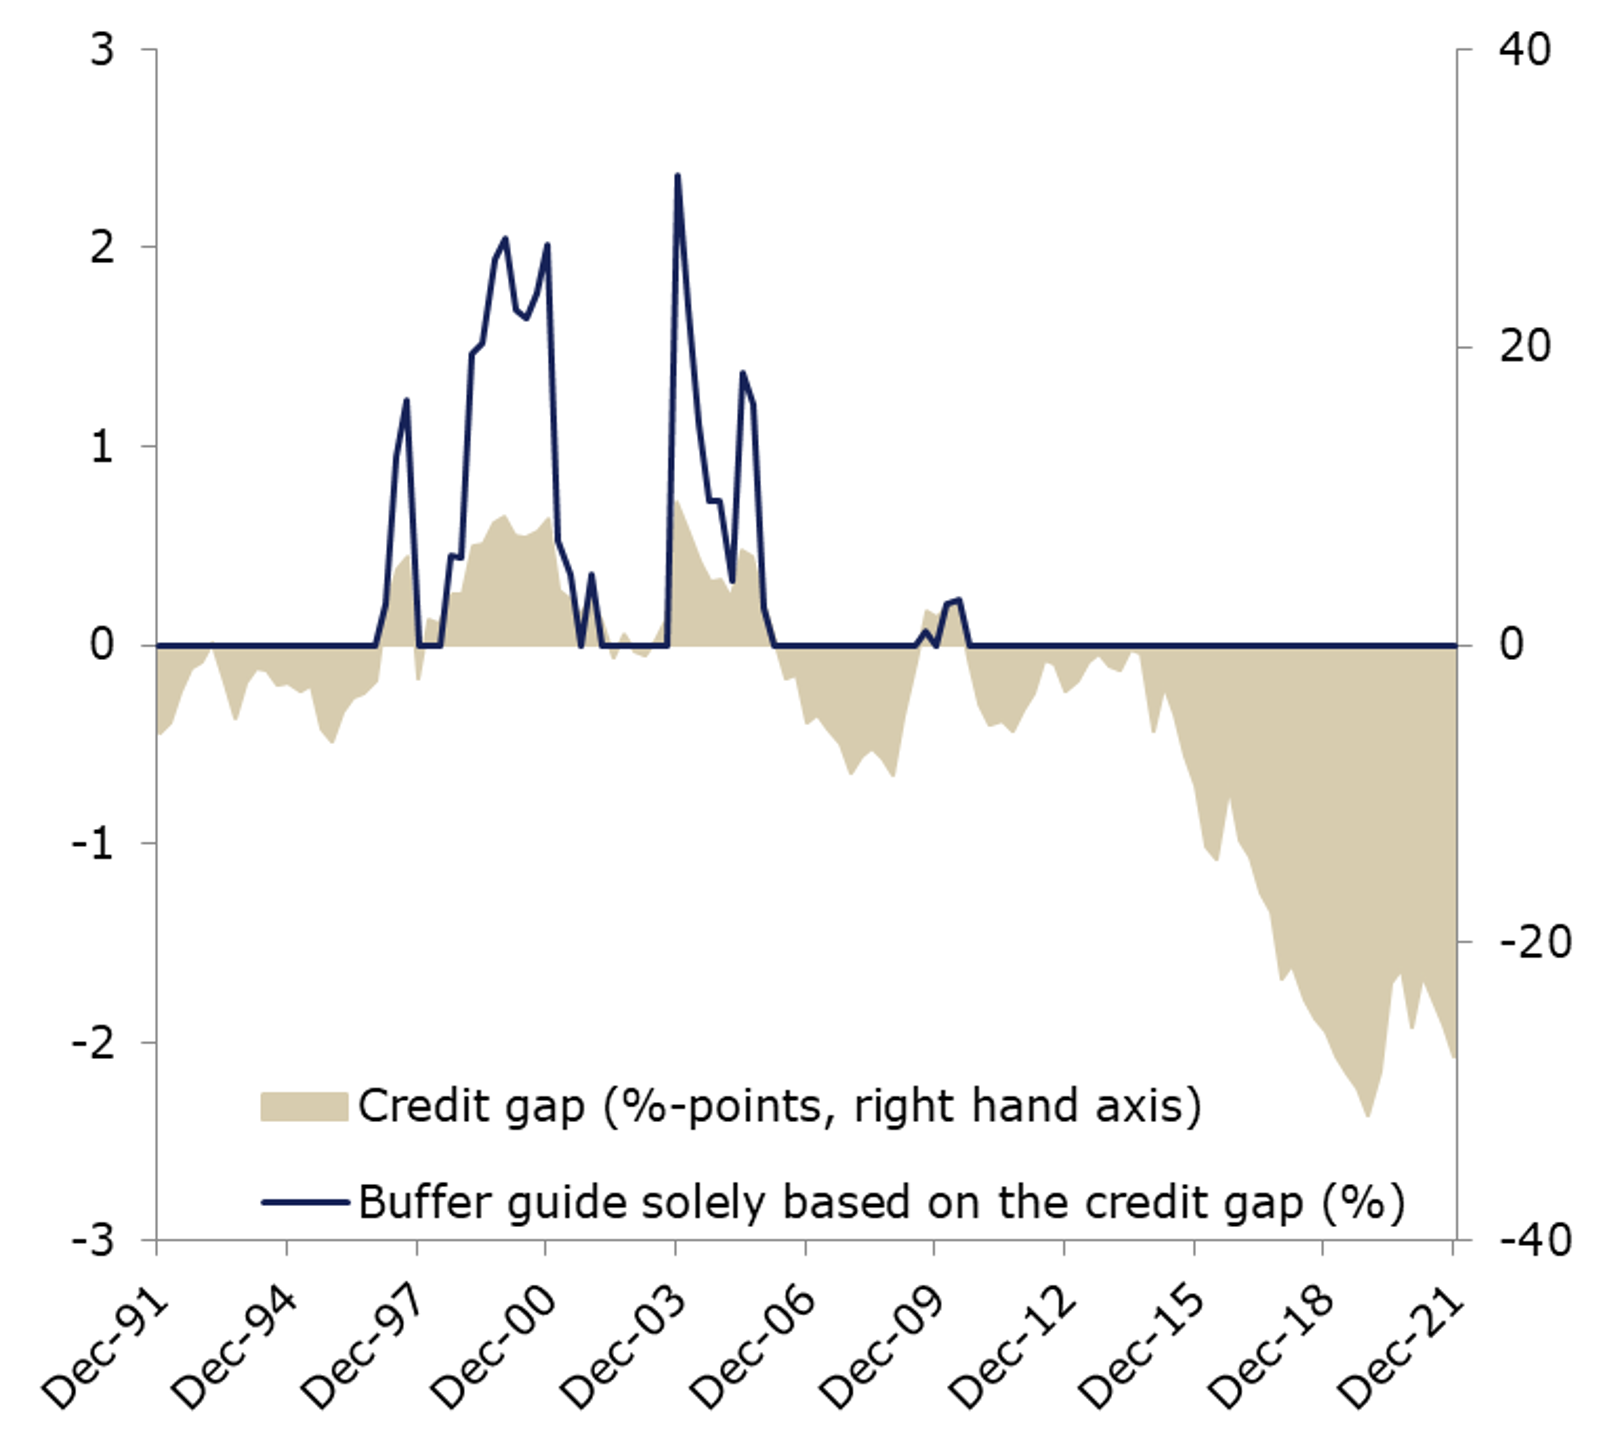 The credit gap for the Netherlands and the corresponding buffer guide